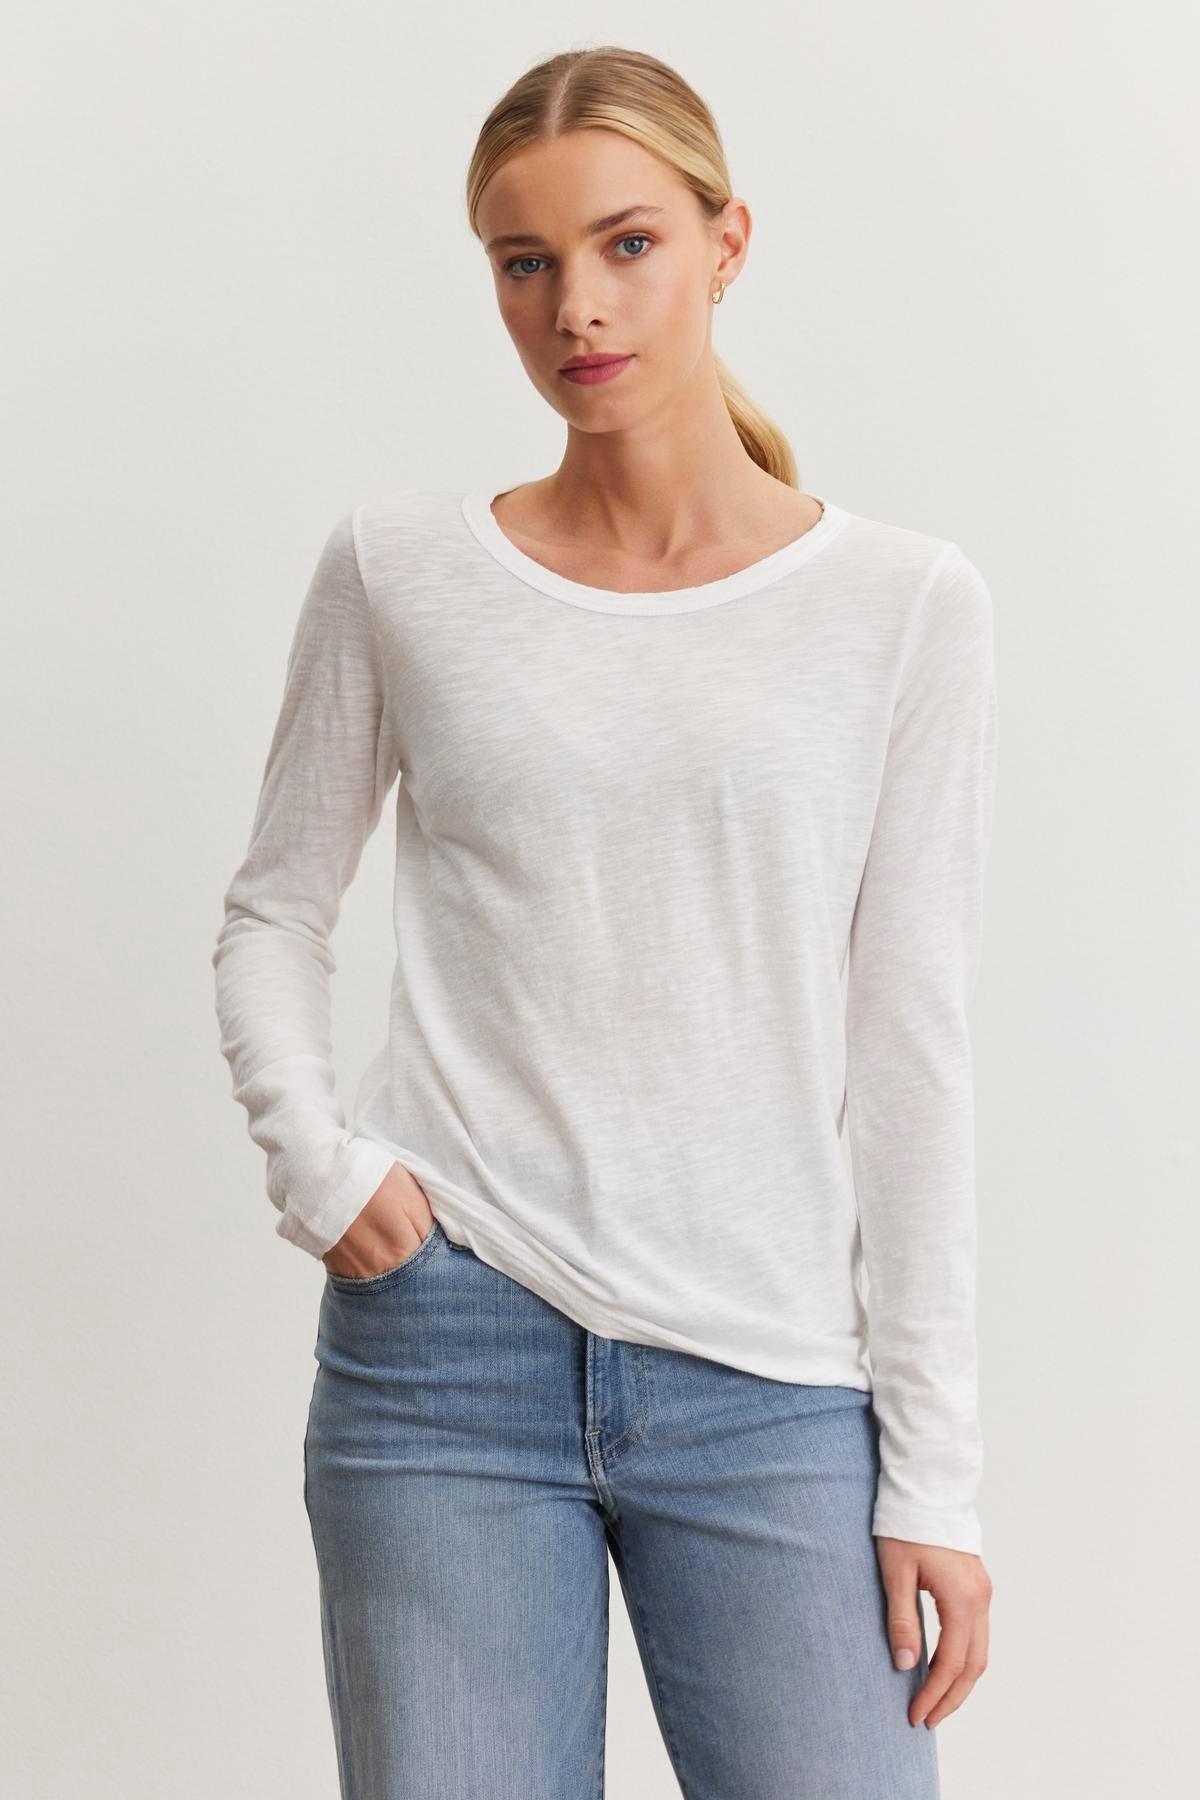   A person with blonde hair in a ponytail is wearing a white long-sleeve, classic crew neckline LIZZIE TEE by Velvet by Graham & Spencer and blue jeans, standing against a plain white background. 